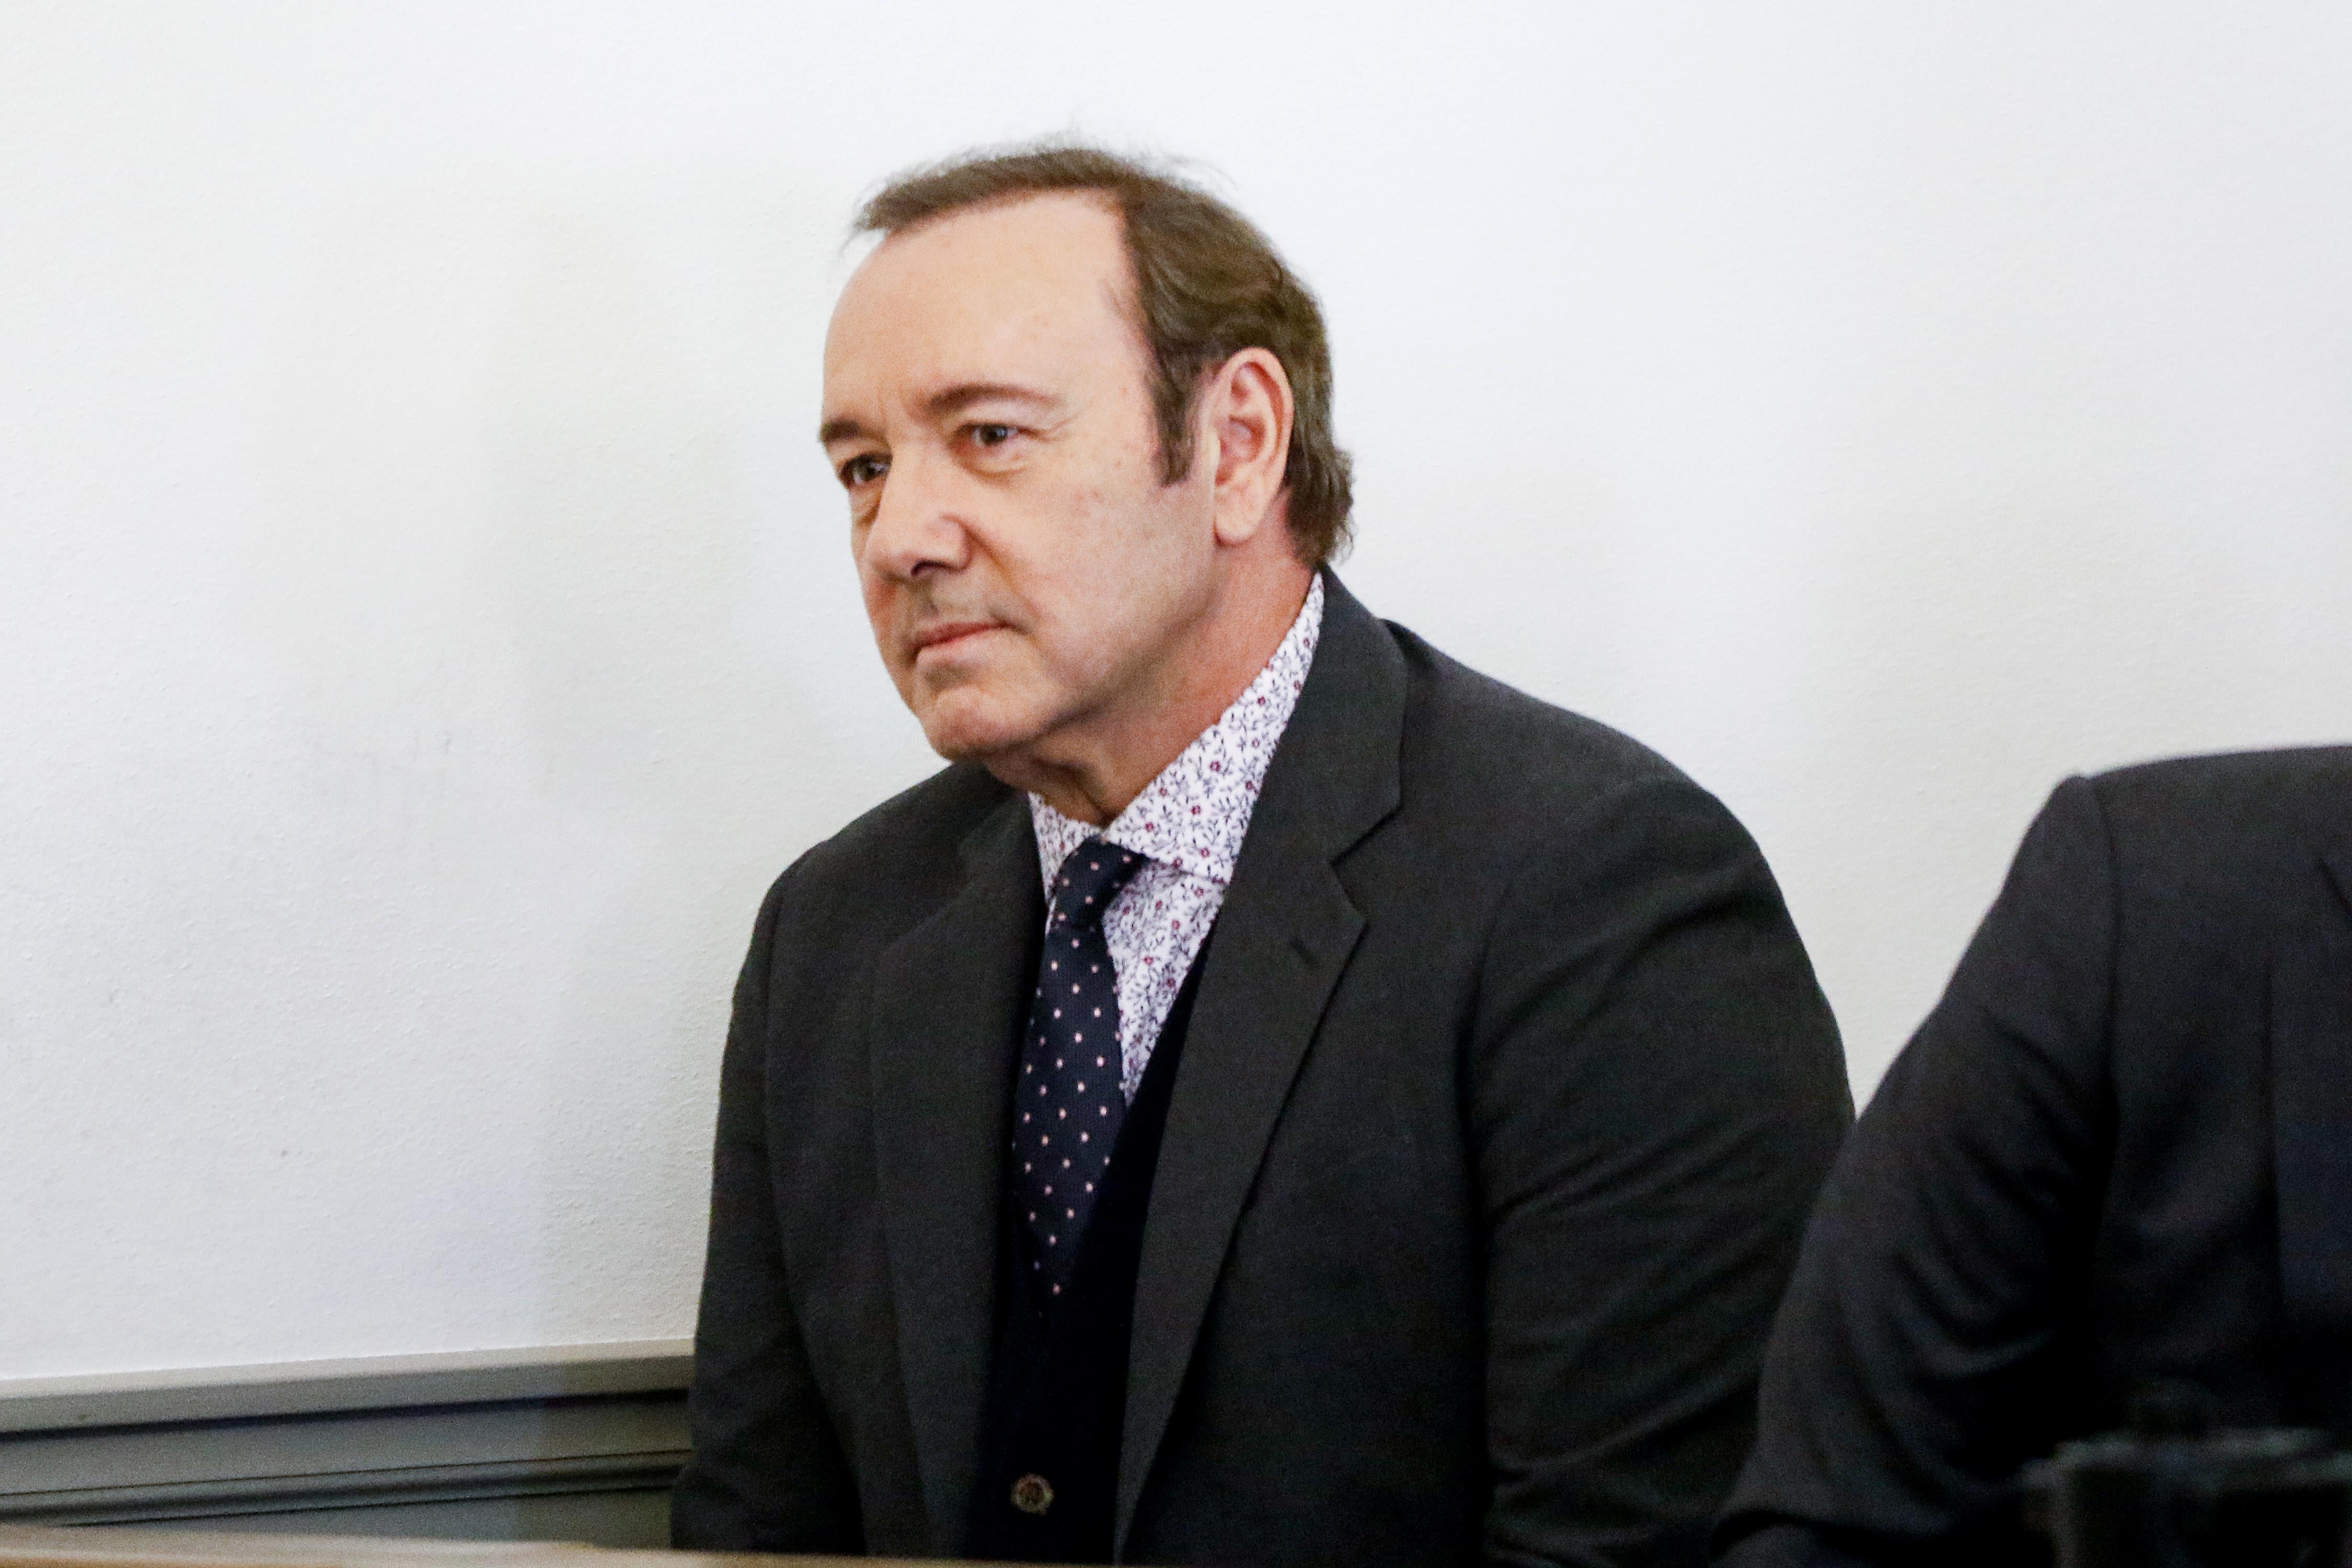 Kevin Spacey sits in a courtroom.